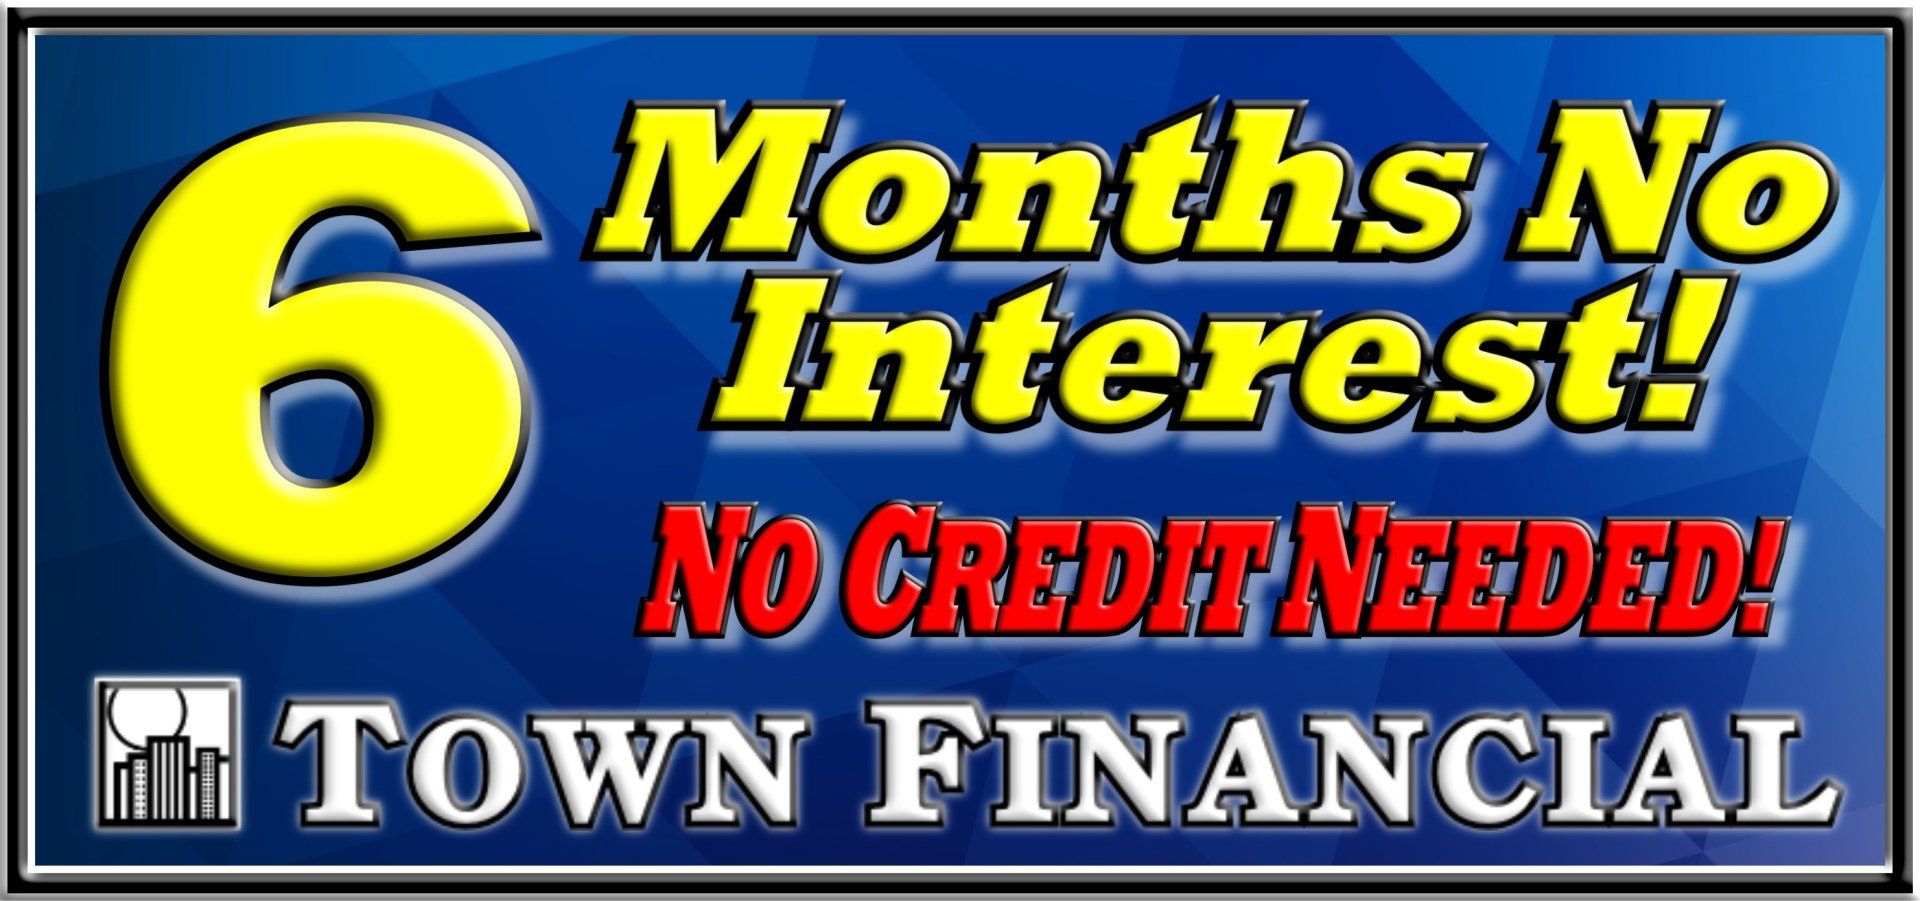 6 Months No interest, no credit financing from Town Financial